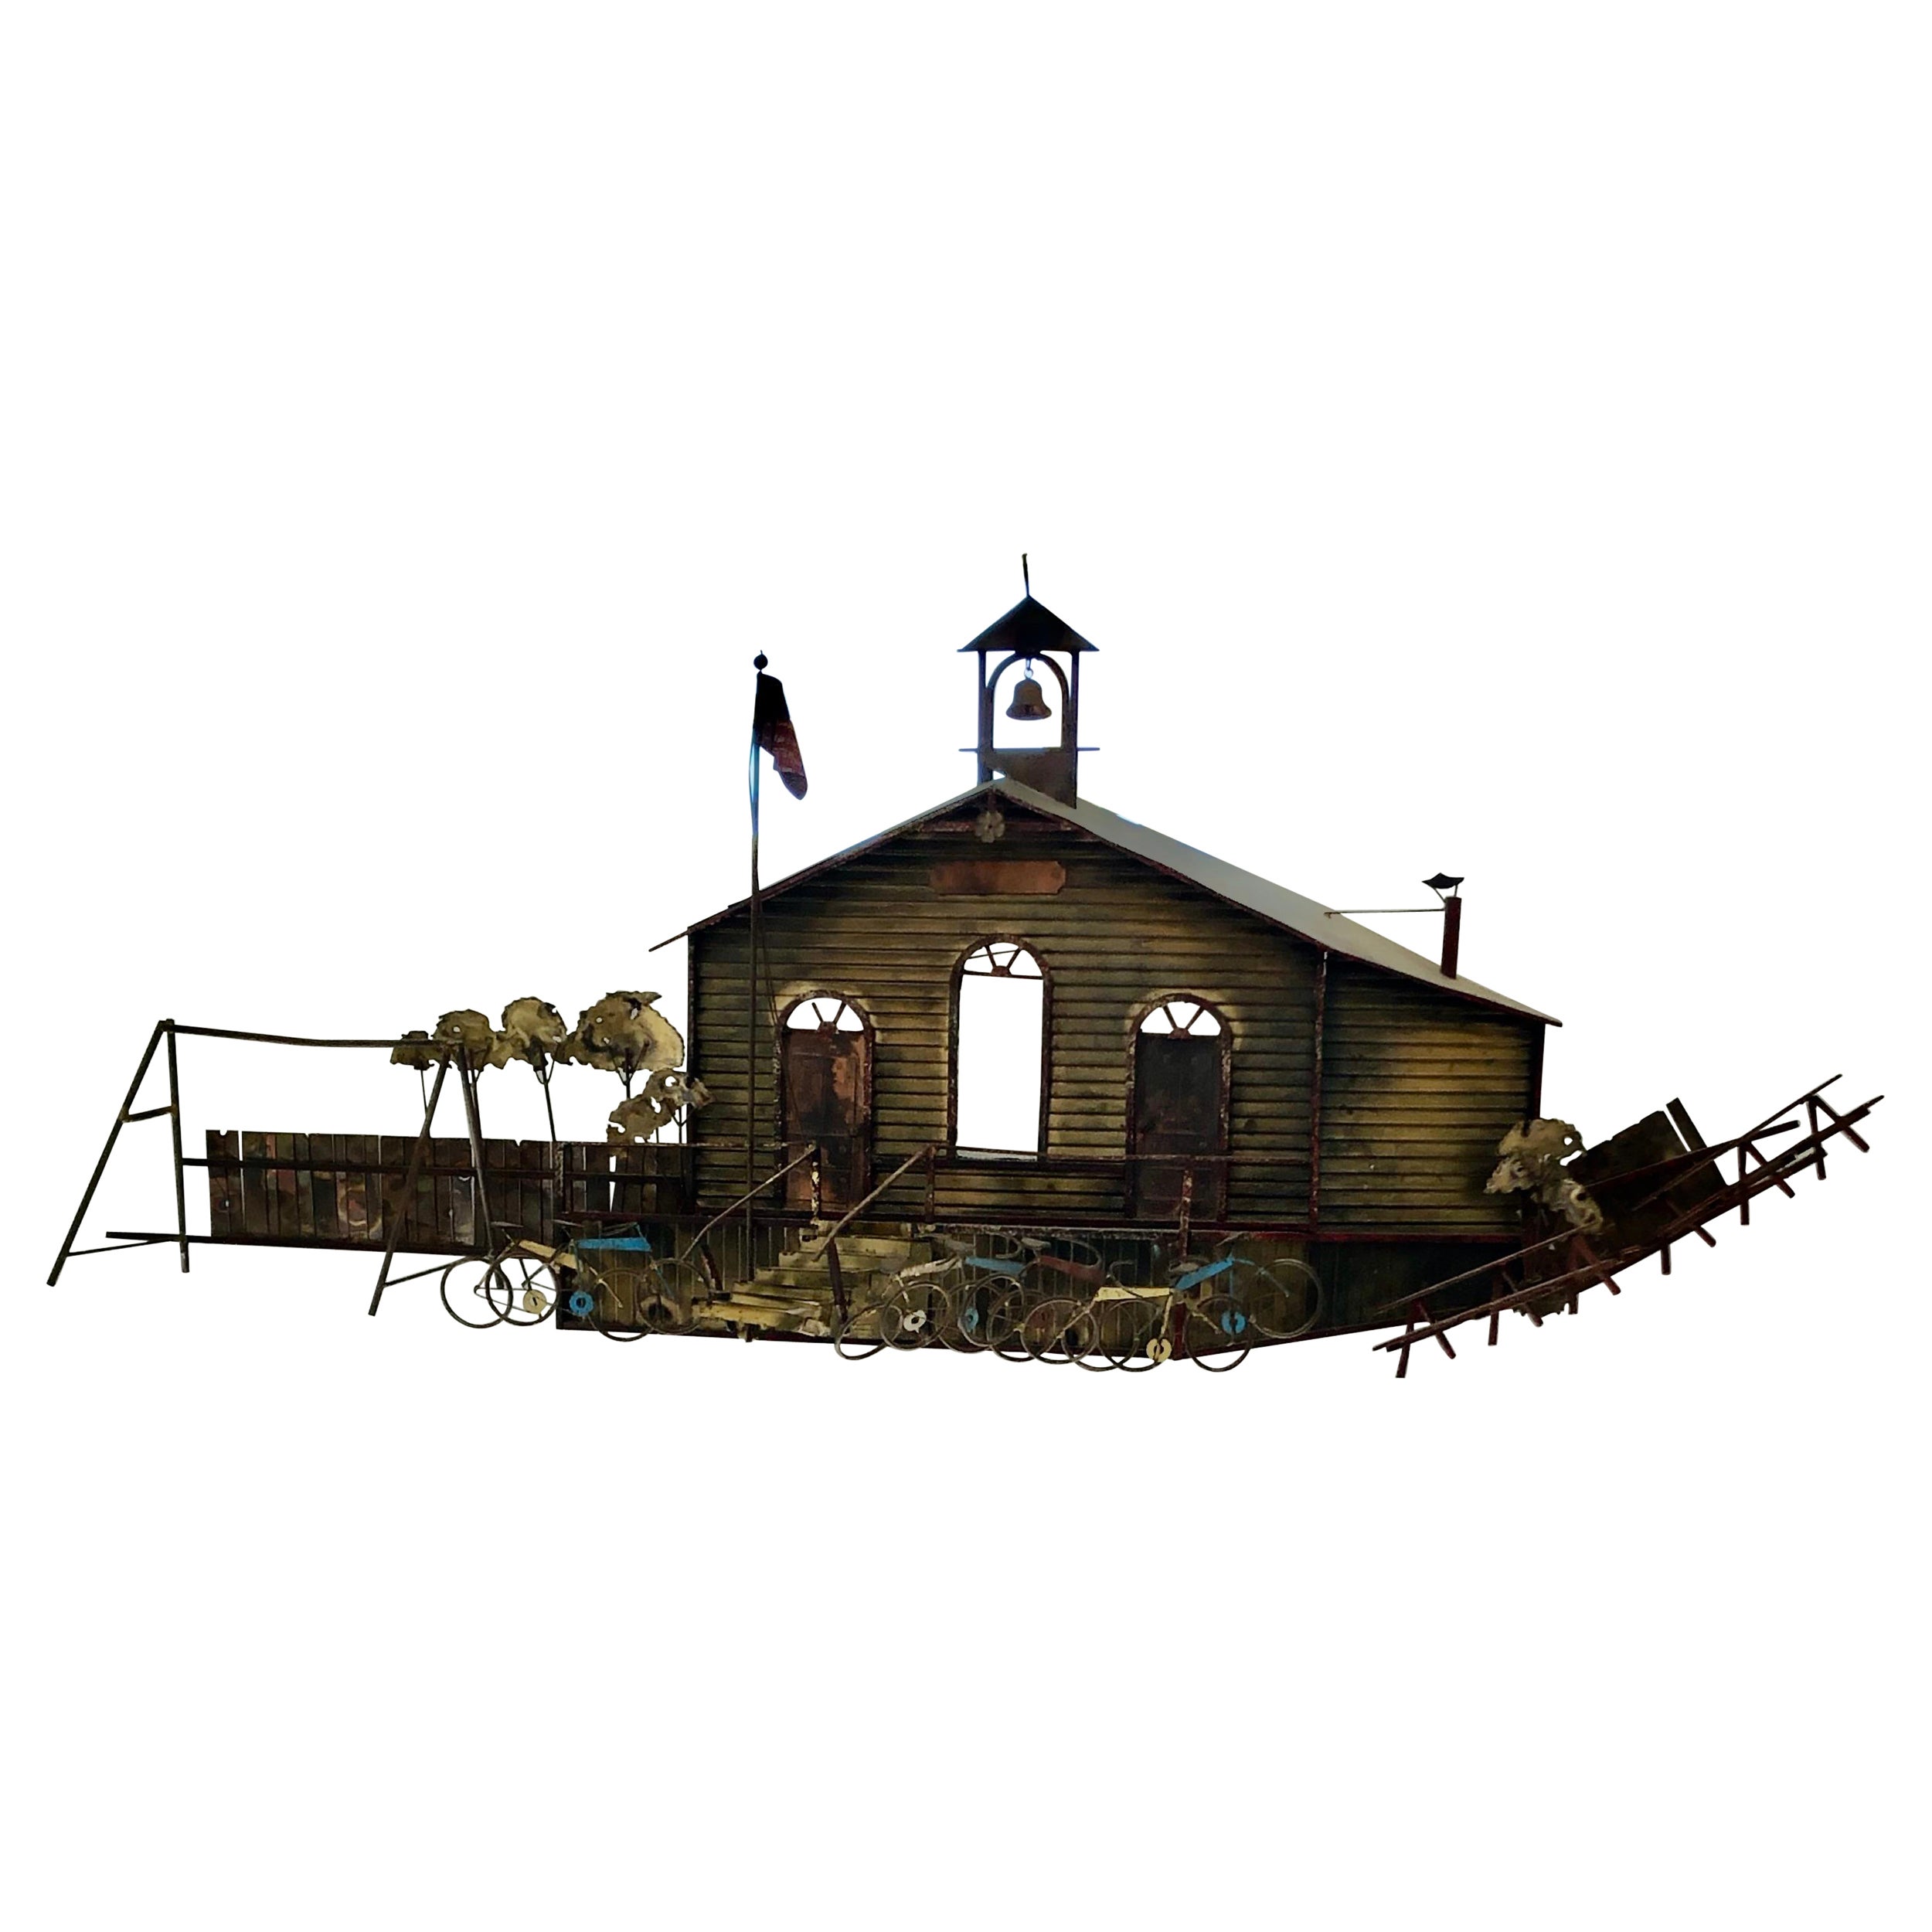 Delightful Artisan Made Metal Wall Sculpture of a Schoolyard For Sale